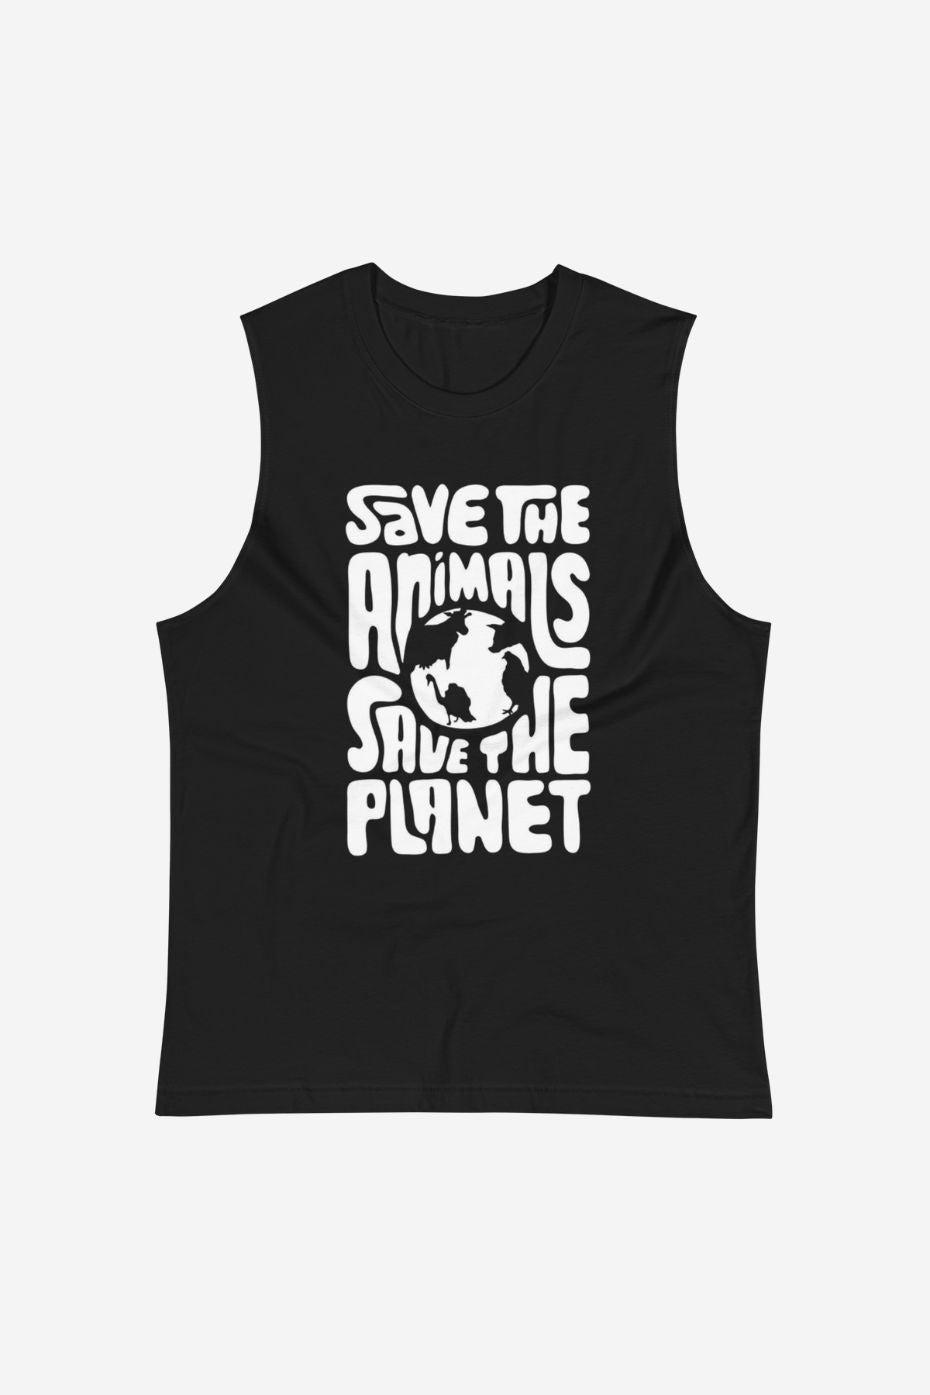 Save The Planet - Unisex Muscle Shirt